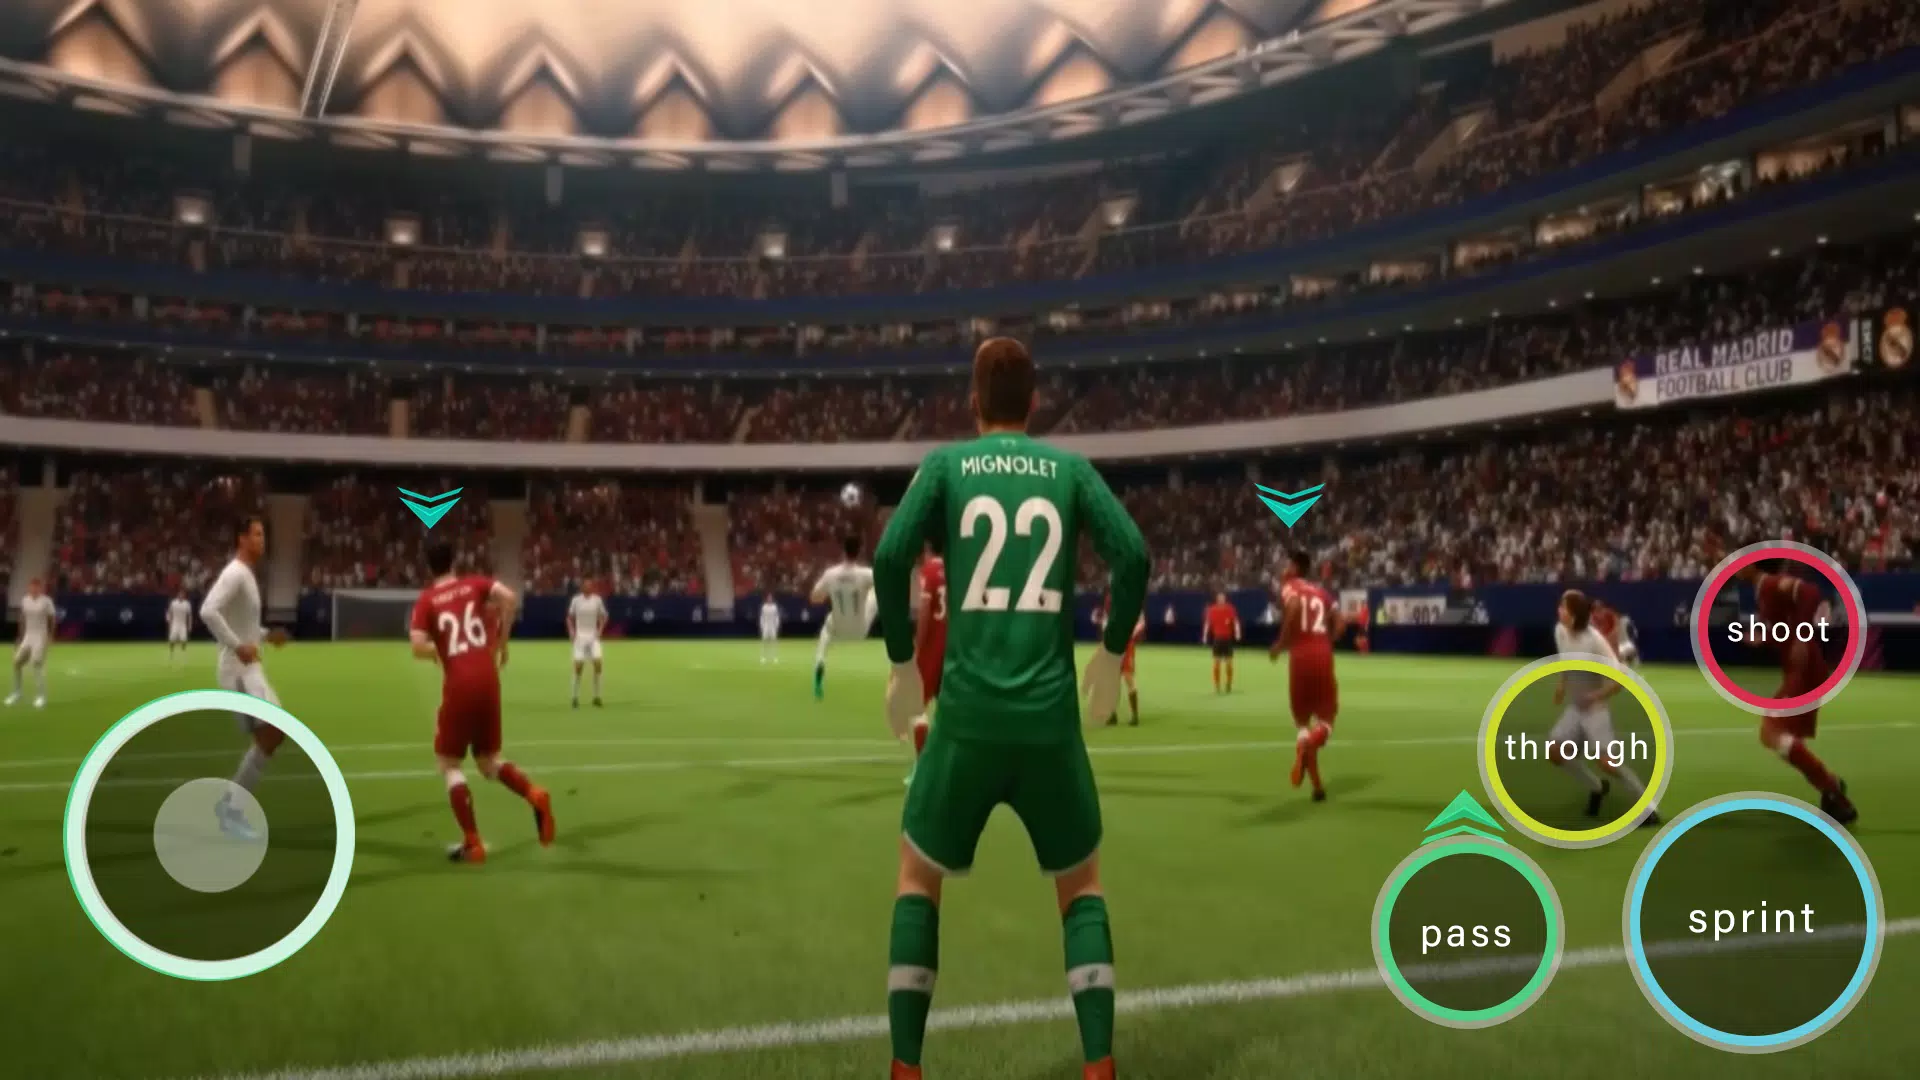 Football League Soccer 2023 APK for Android Download